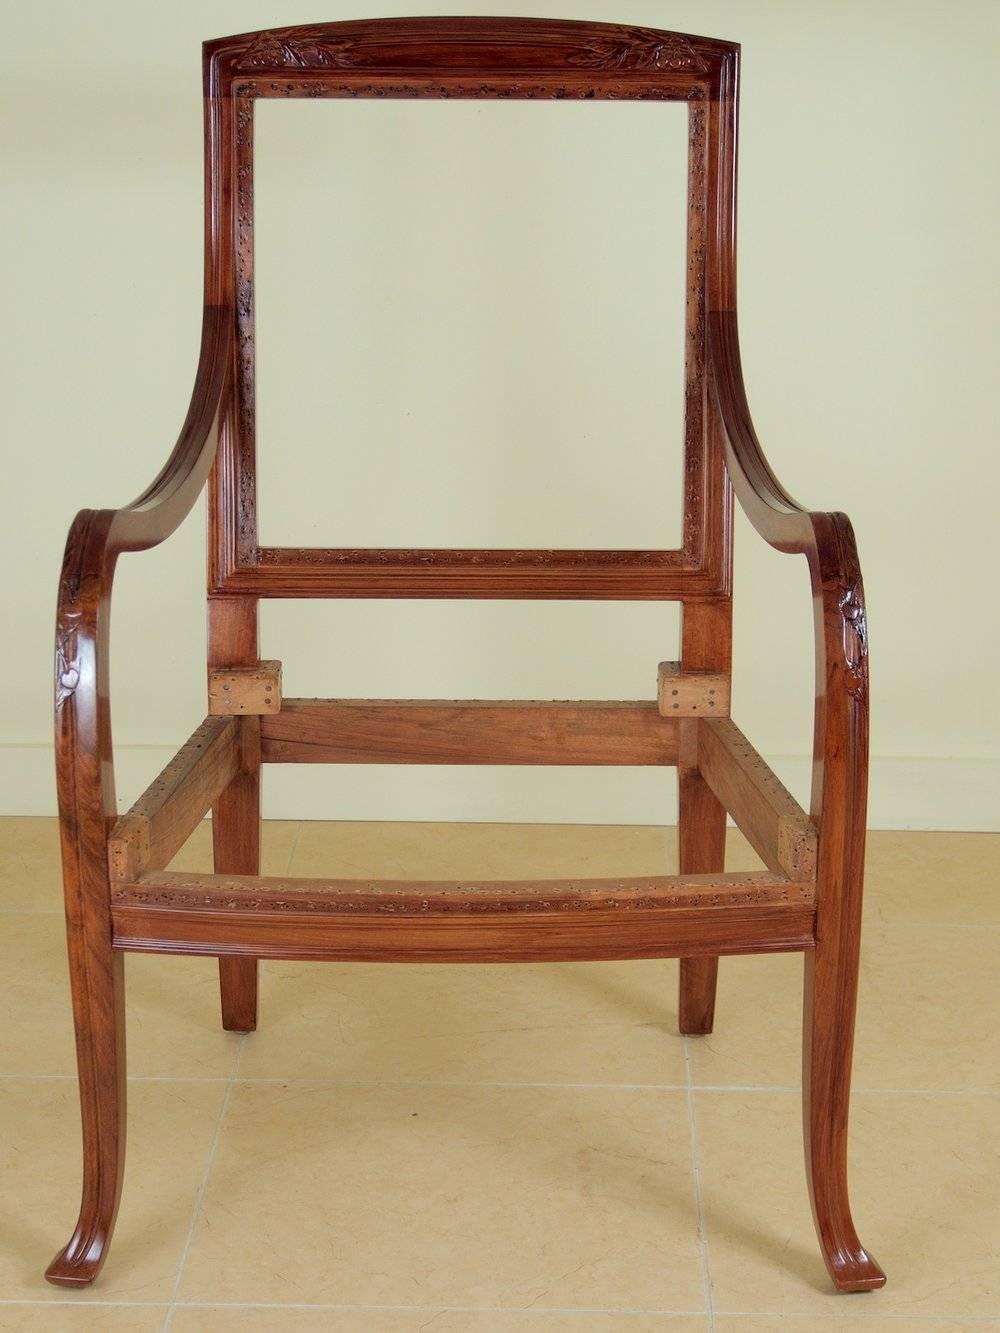 Abel Landry Pair of Art Nouveau Armchairs In Excellent Condition For Sale In Philadelphia, PA